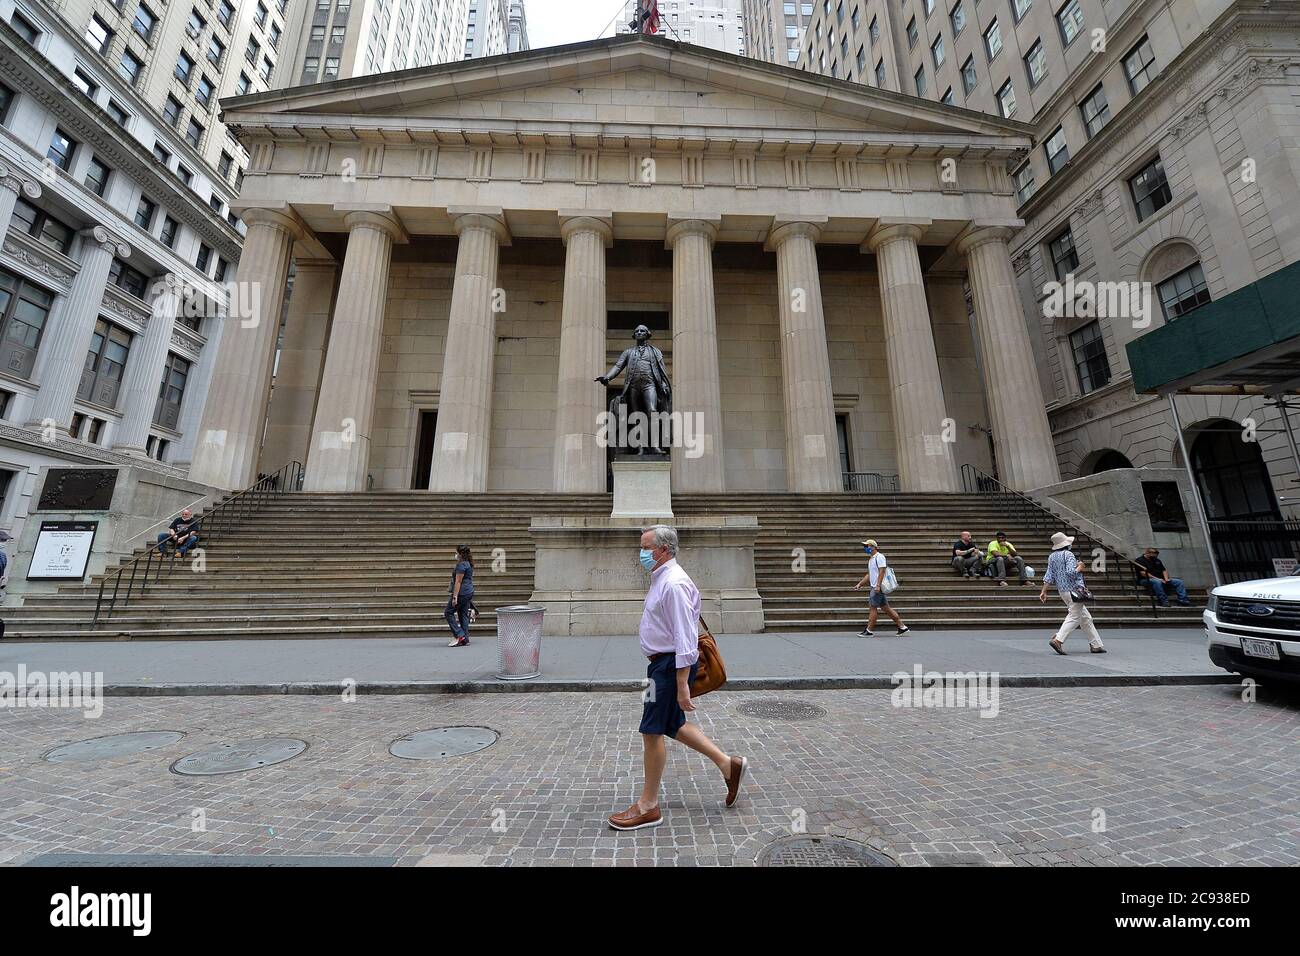 A man walks past Federal Hall and the statue of President George Washington along Wall Street, after Senate Republicans announced a $1 trillion stimulus package the day before, New York, NY, July 28, 2020. Republicans unveiled the “Heals” Act (Health, Economic Assistance Liability Protection & Schools Act), with a one time $1,200 stimulus check to every tax payer, $2,400 for married/joint filers, unemployment benefits capped at 70% of wages, Payroll Protection Program Loans and $105 billion for schools. (Anthony Behar/Sipa USA) Stock Photo